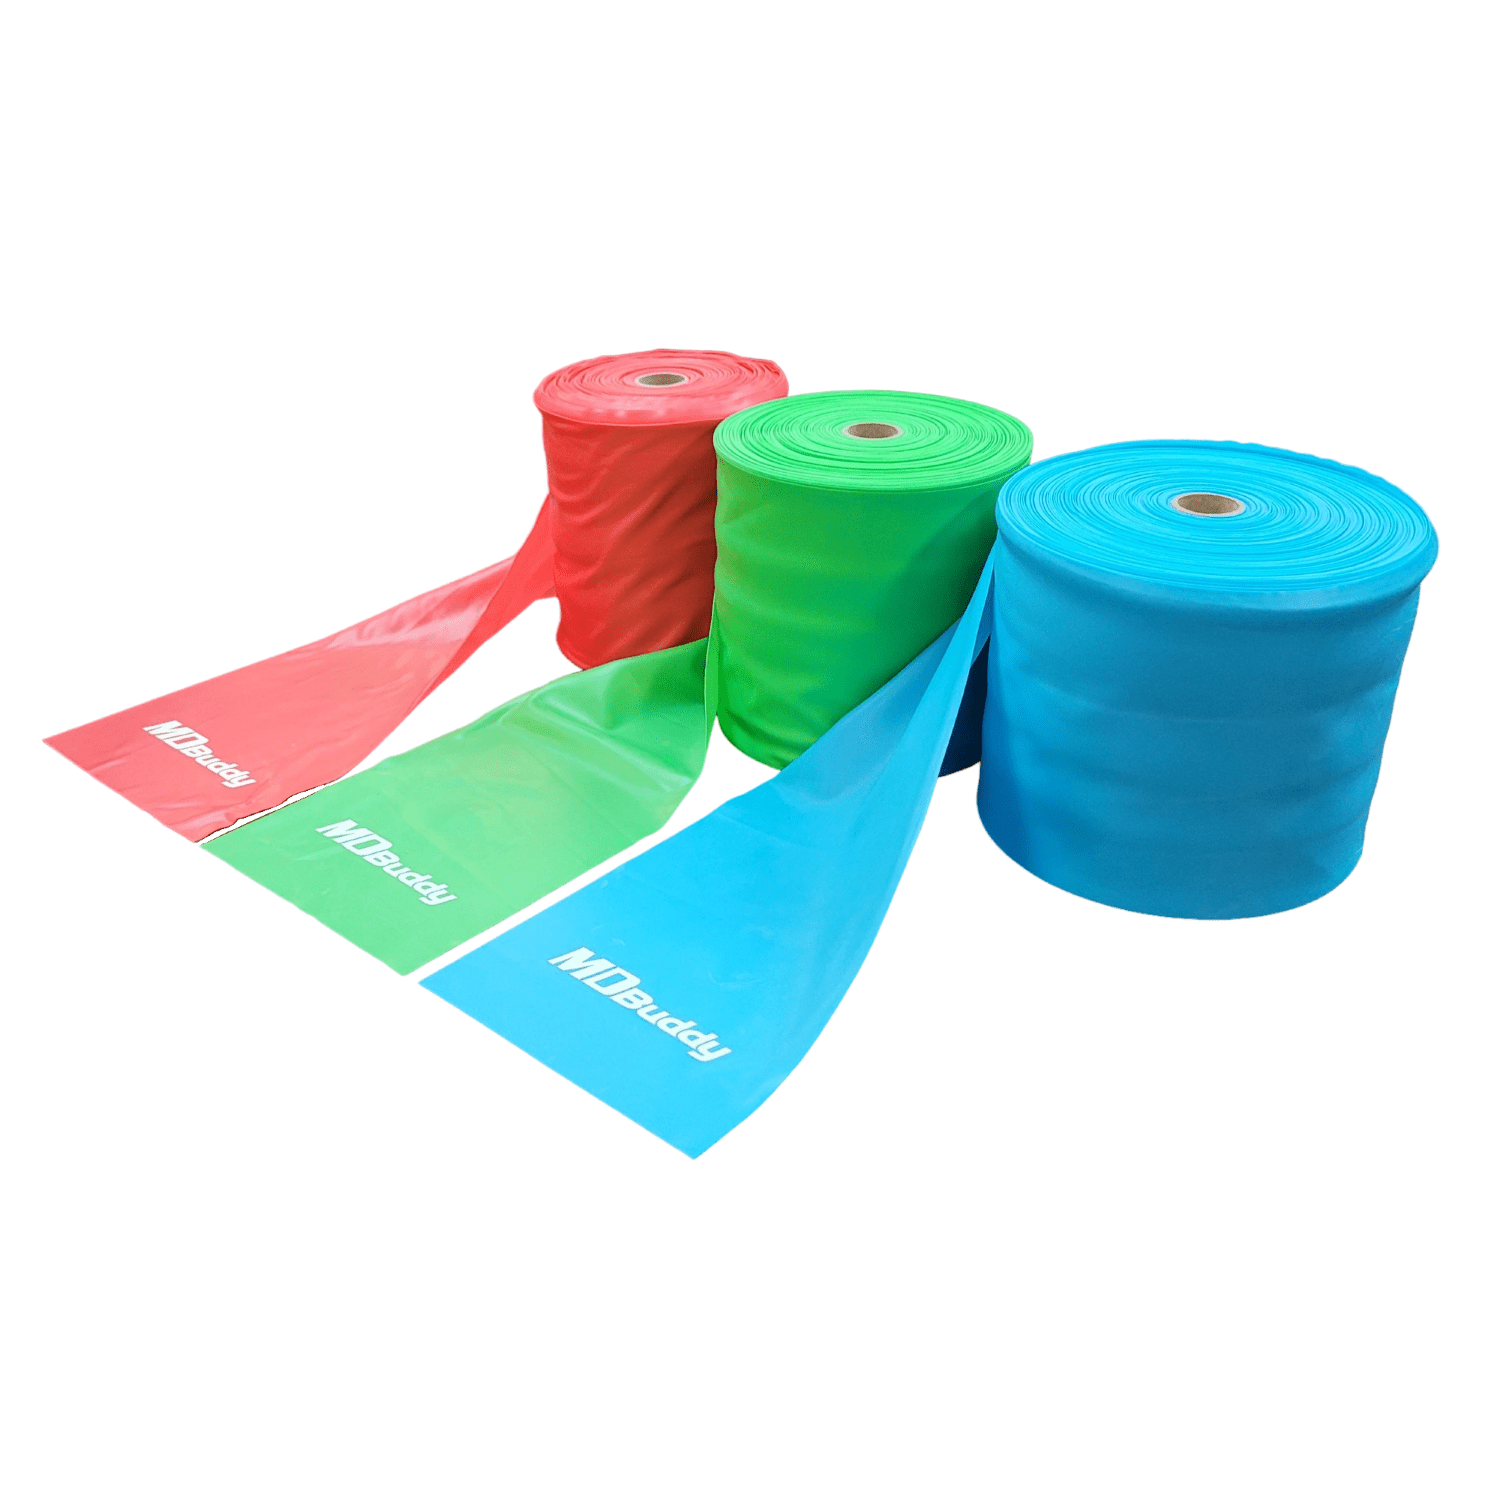 MD Buddy Latex Free 50M Roll Of Bands-50M Roll Bands-MD Buddy-1